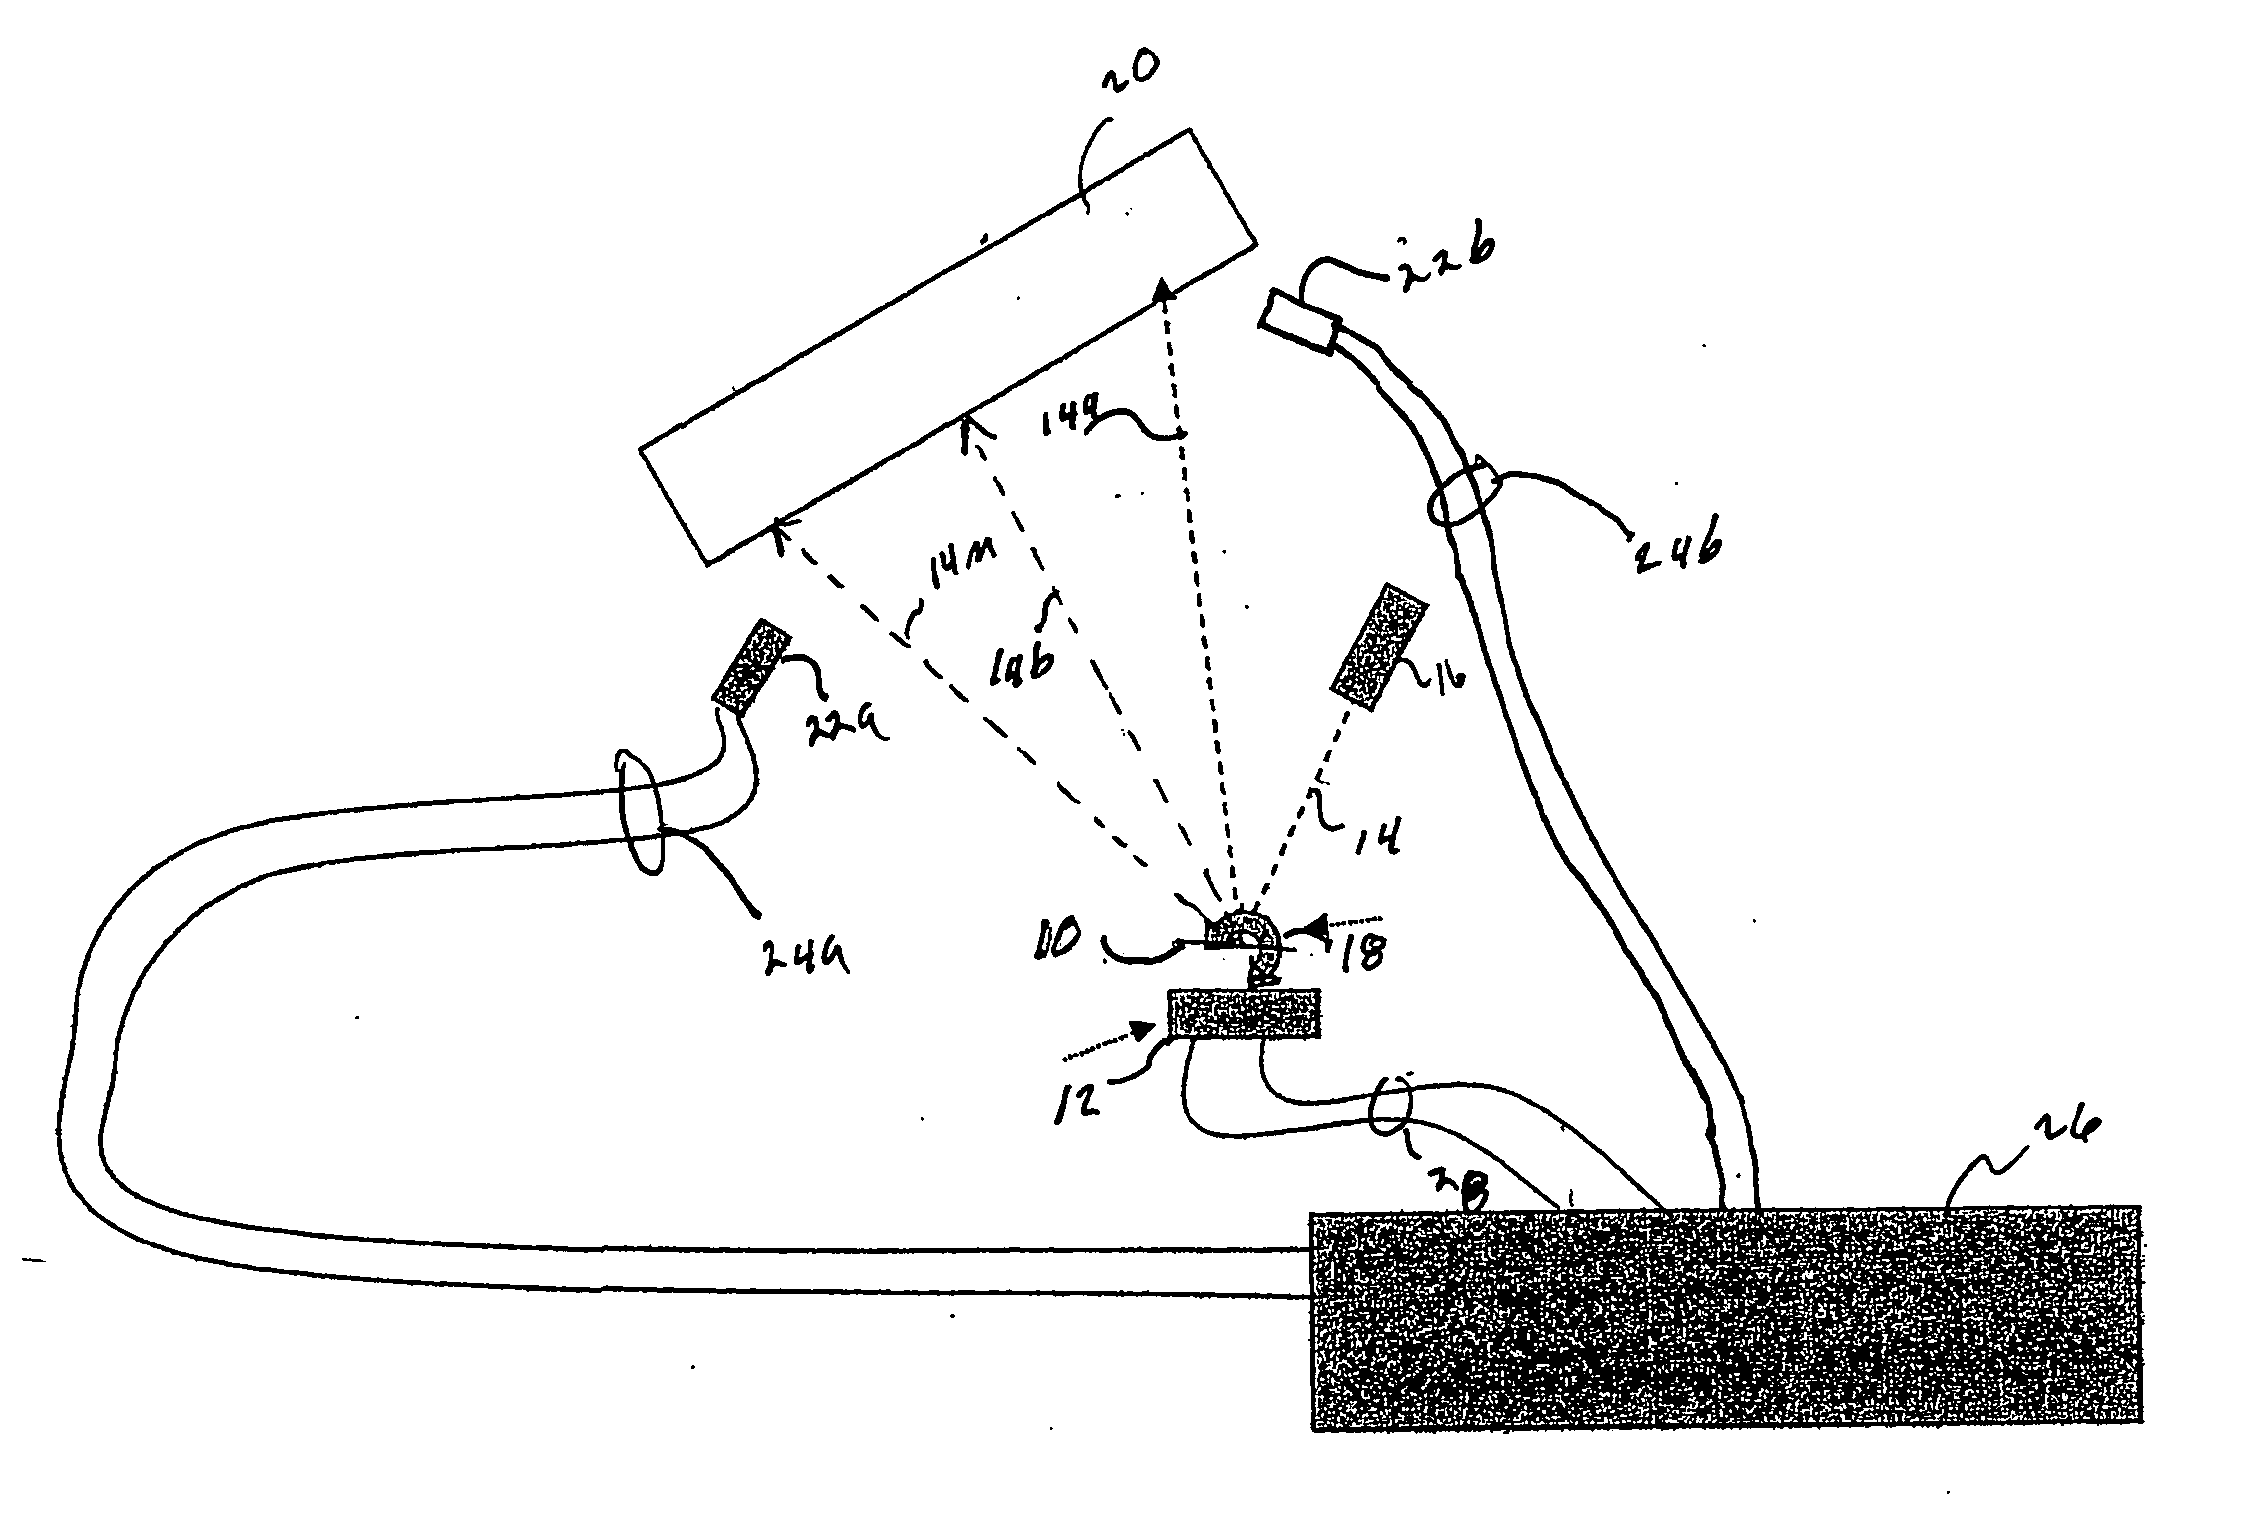 Stabilization of closed loop operation of a torsional hinged device